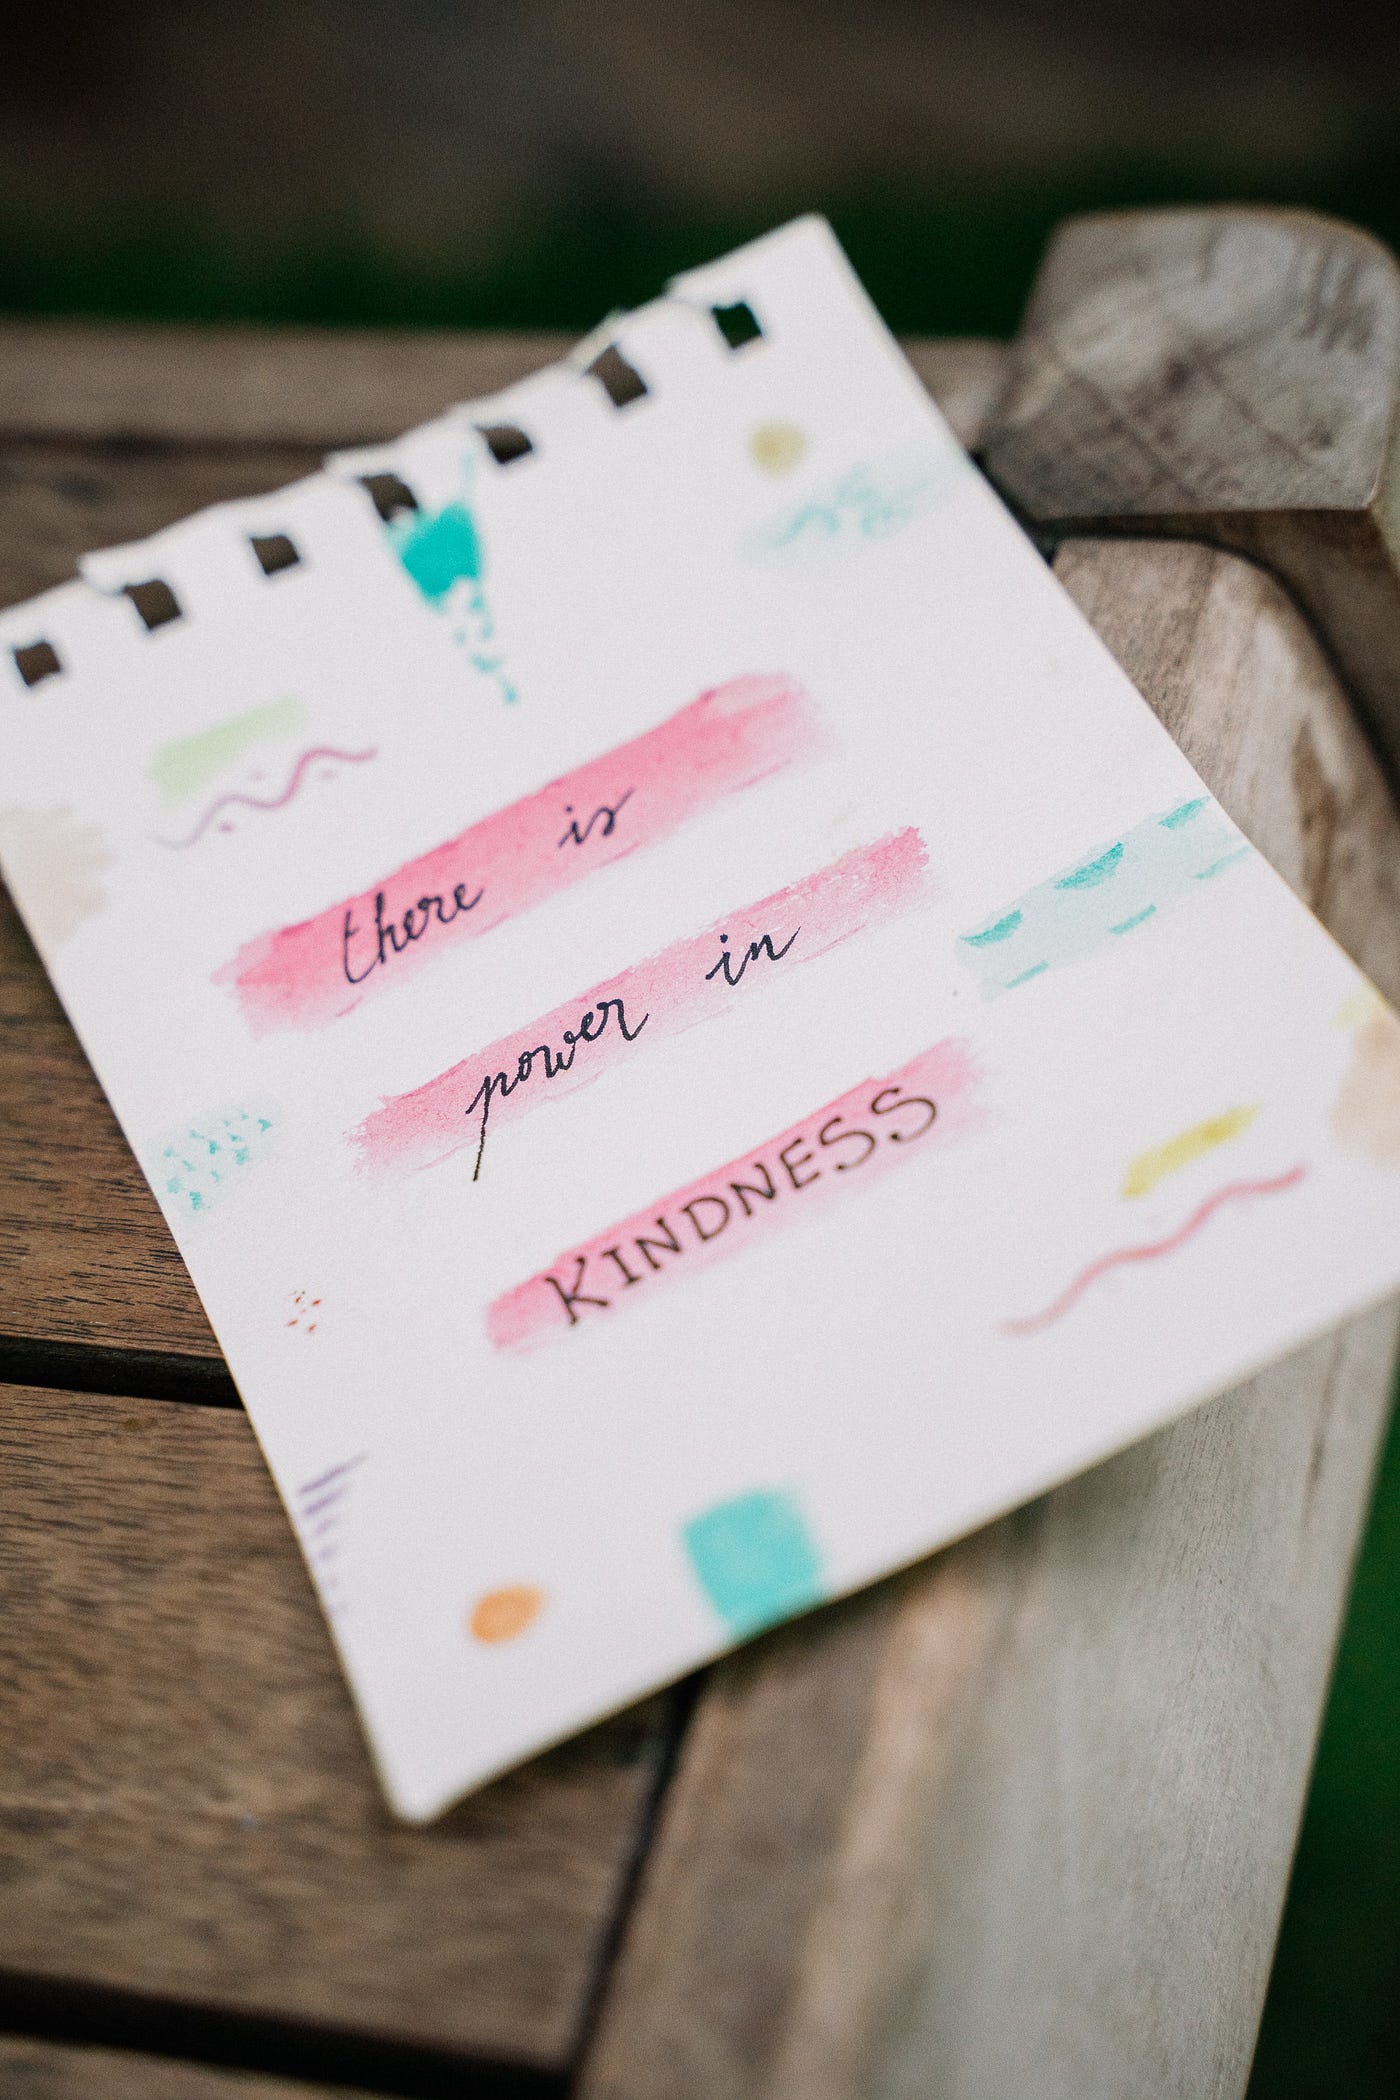 There is power in kindness message on paper.